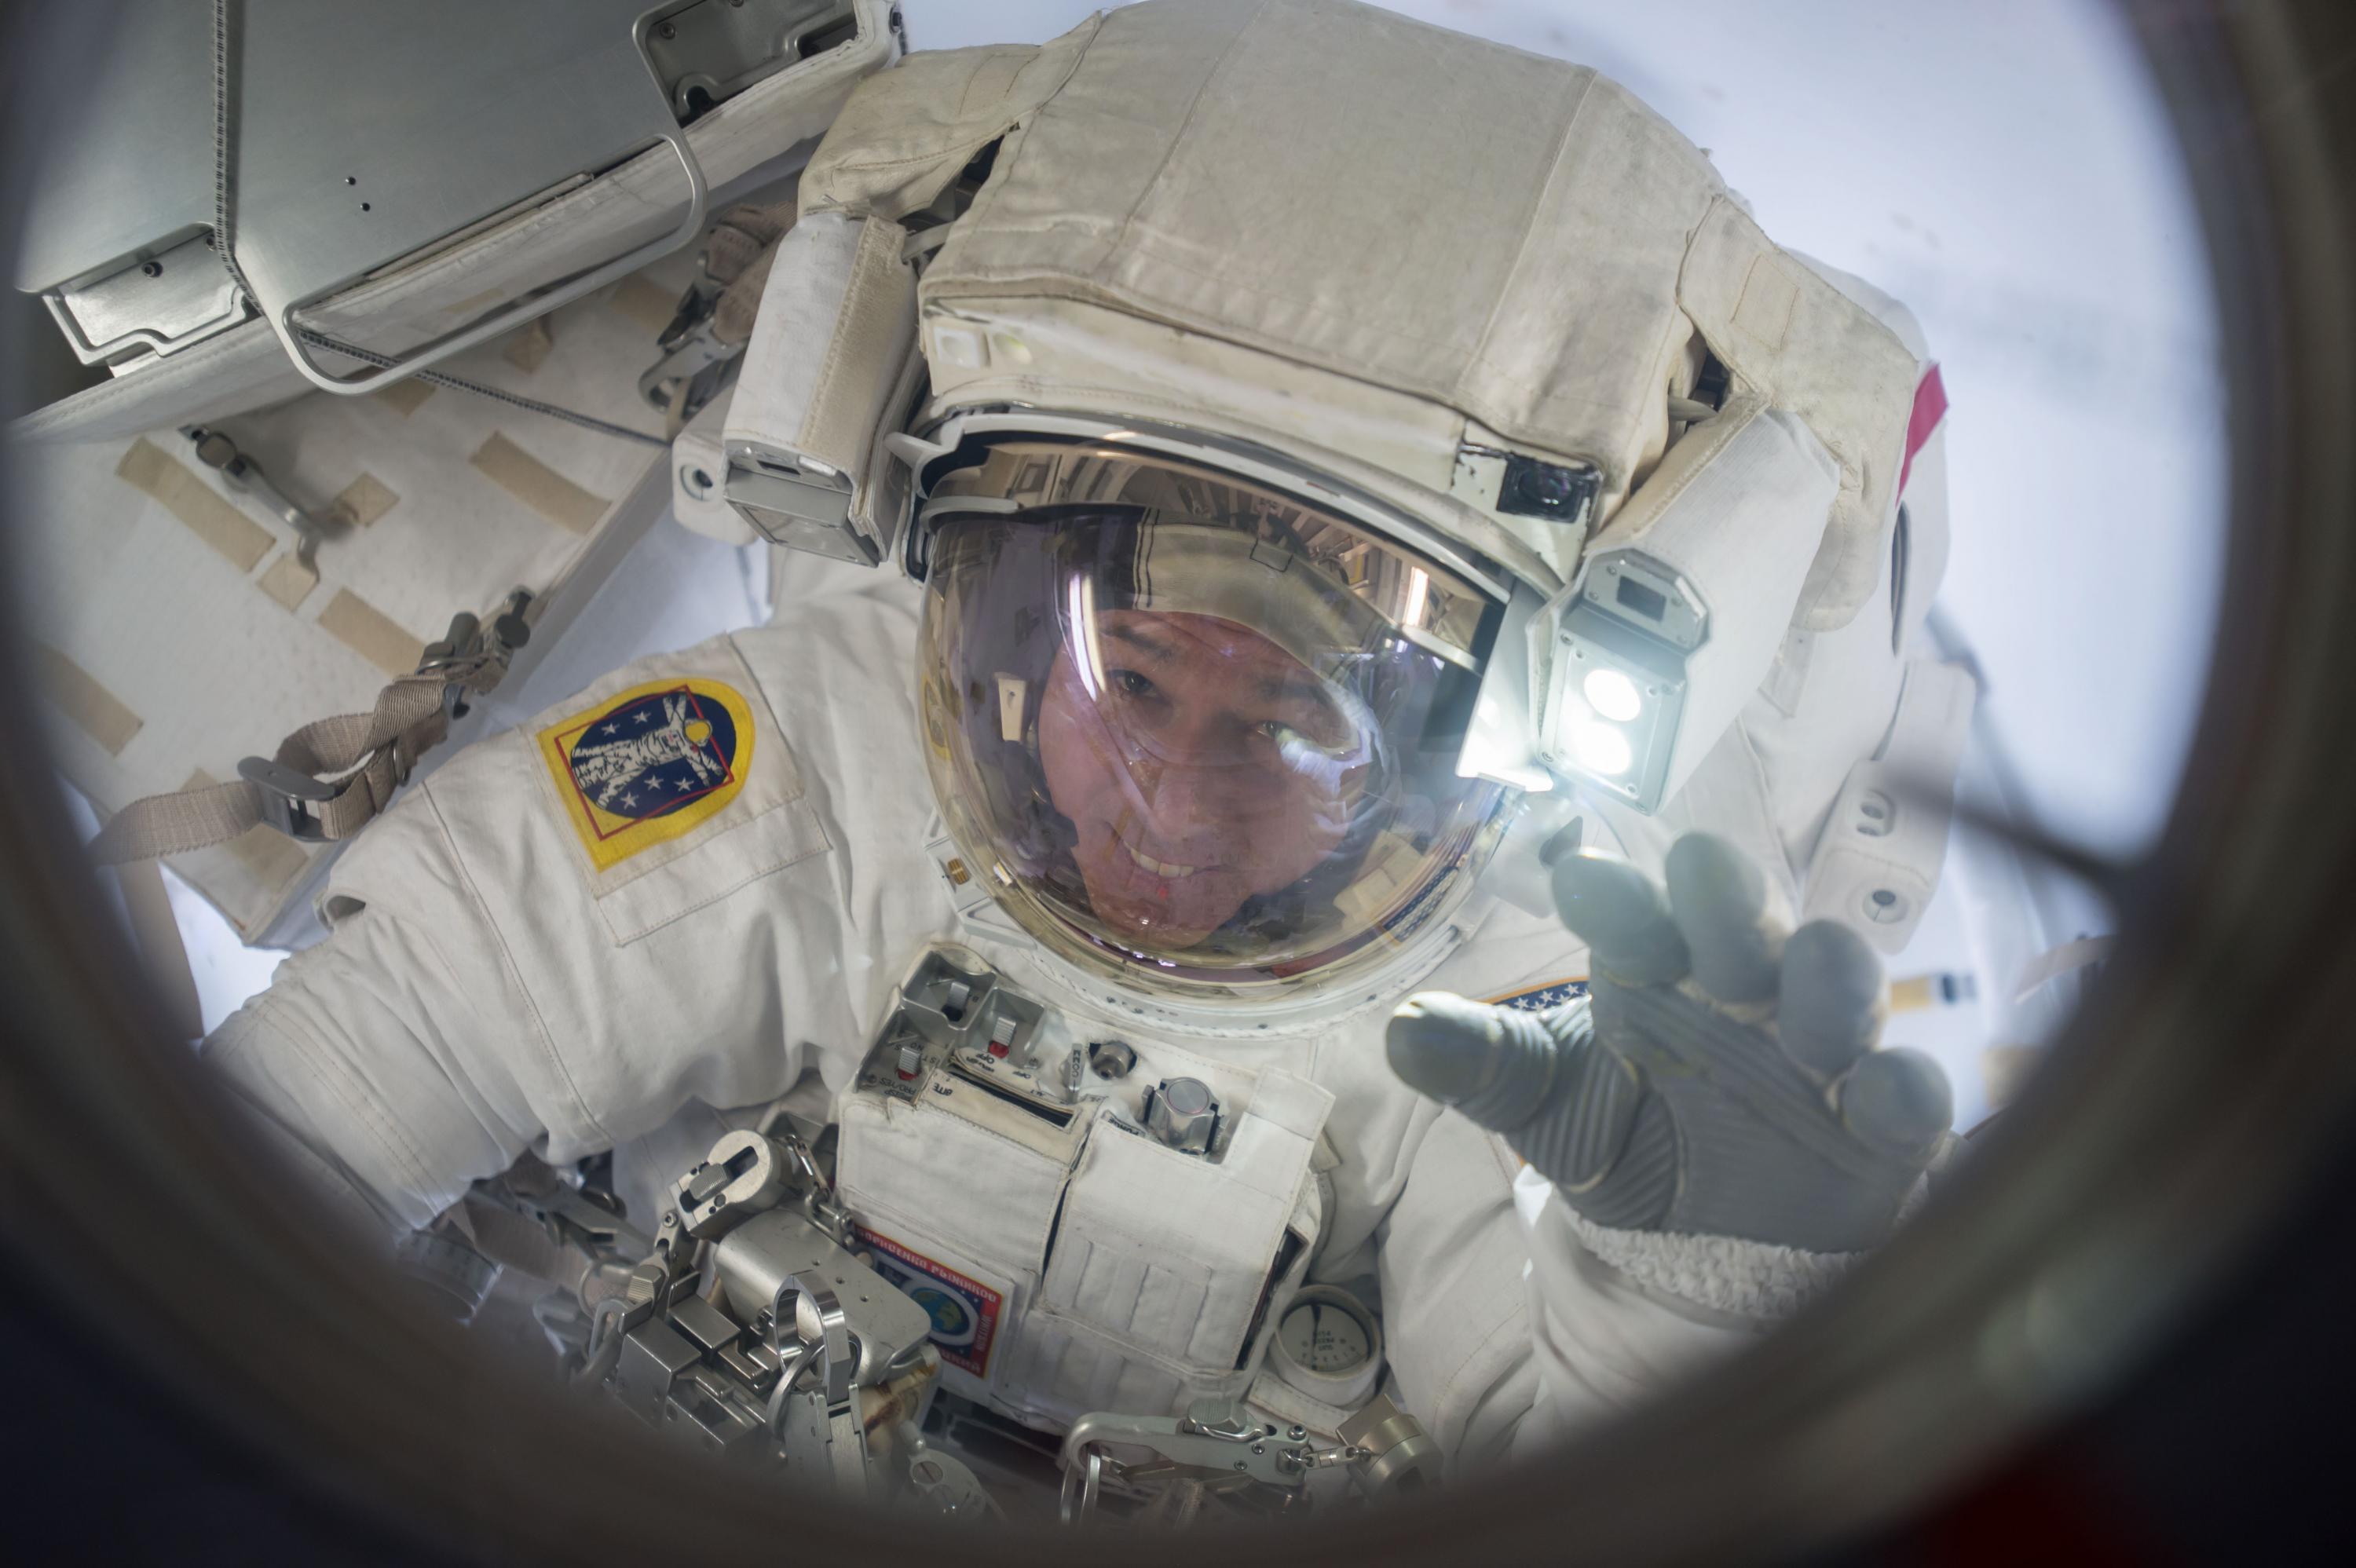 Tech graduate Shane Kimbrough is seen floating in the Quest airlock at the end of a spacewalk outside the International Space Station. Photo courtesy: NASA on March 24, 2017